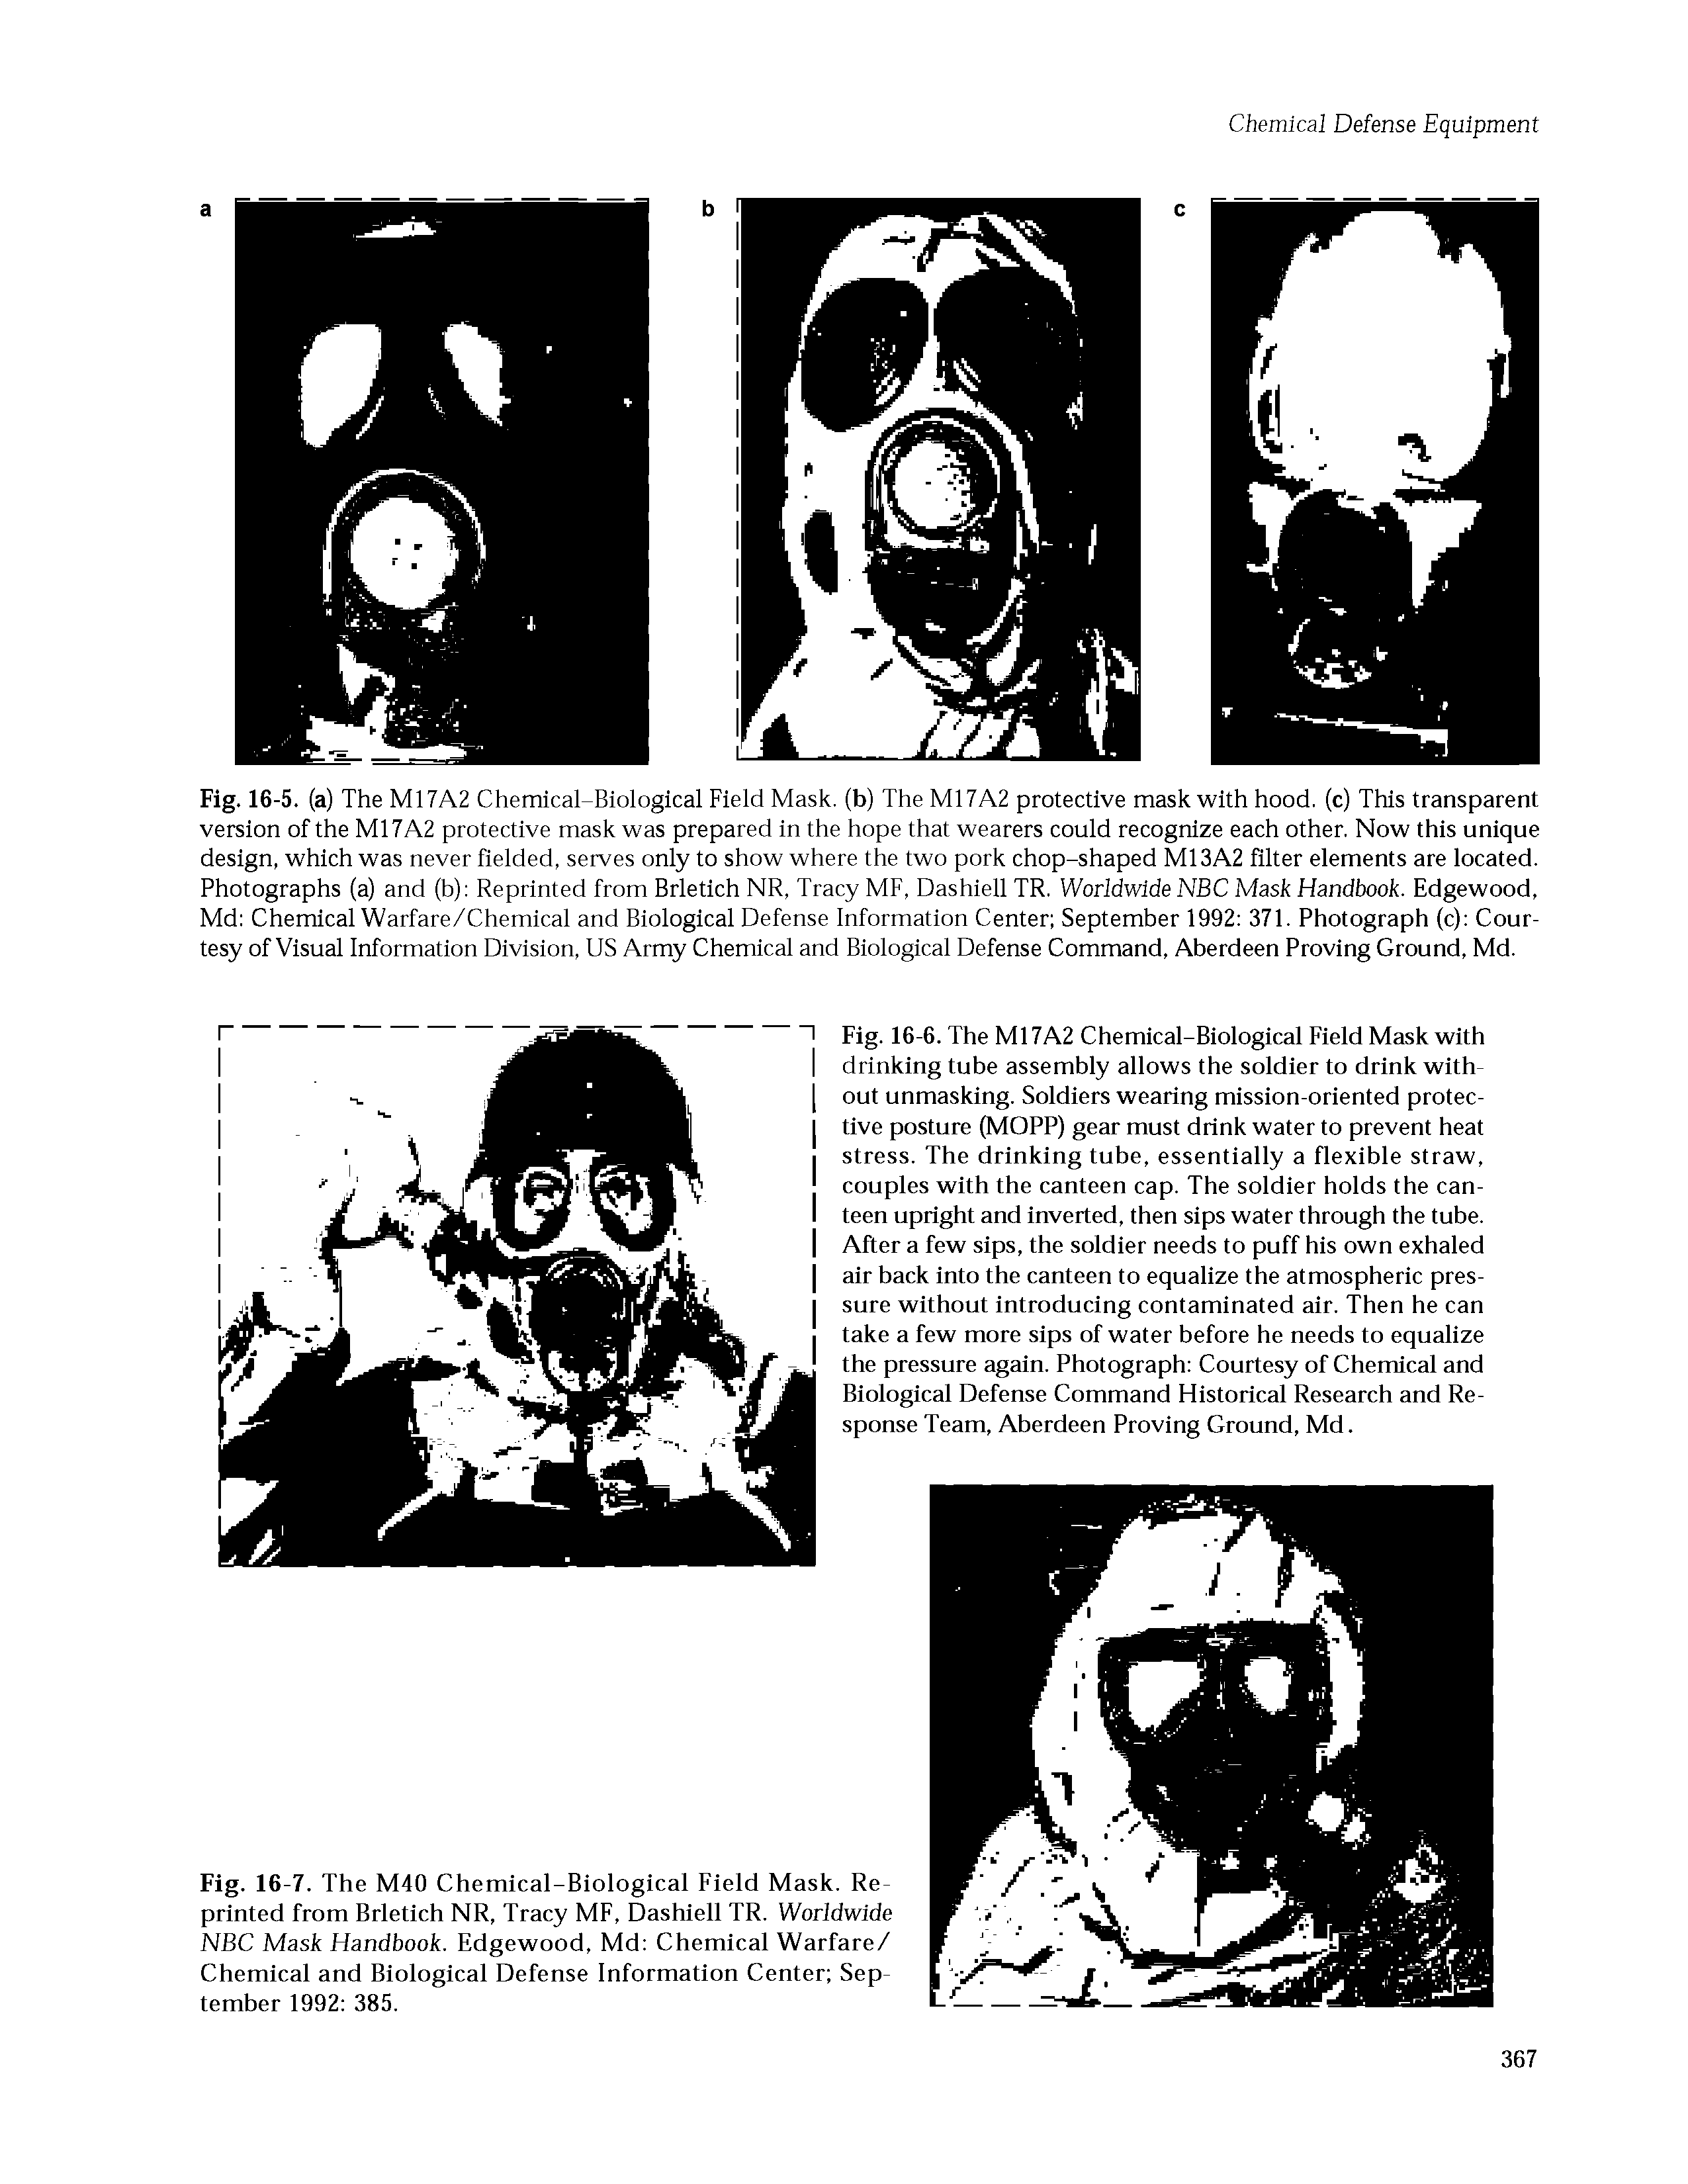 Fig. 16-7. The M40 Chemical-Biological Field Mask. Reprinted from Brletich NR, Tracy MF, Dashiell TR. Worldwide NBC Mask Handbook. Edgewood, Md Chemical Warfare/ Chemical and Biological Defense Information Center September 1992 385.